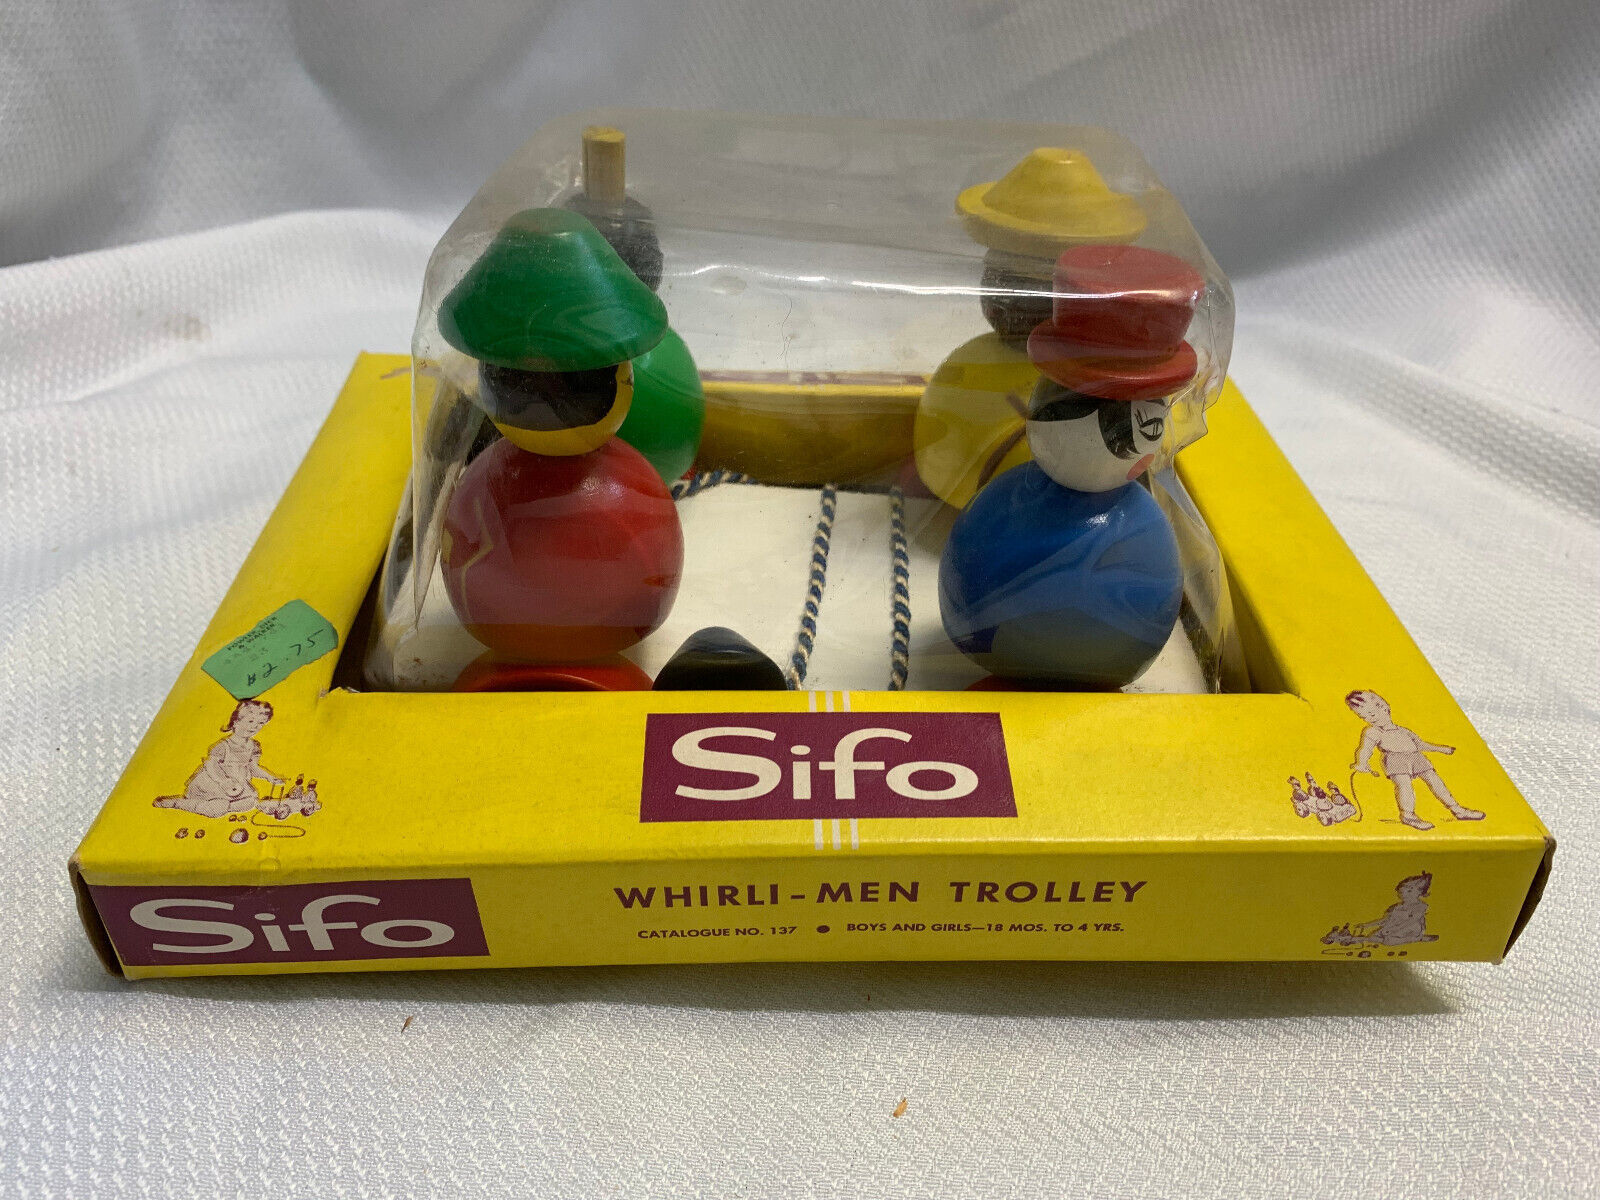 Sifo Vtg Wooden Pull Toy Whirli-Men Trolley #137 Rare in Original Box USA  - $49.95